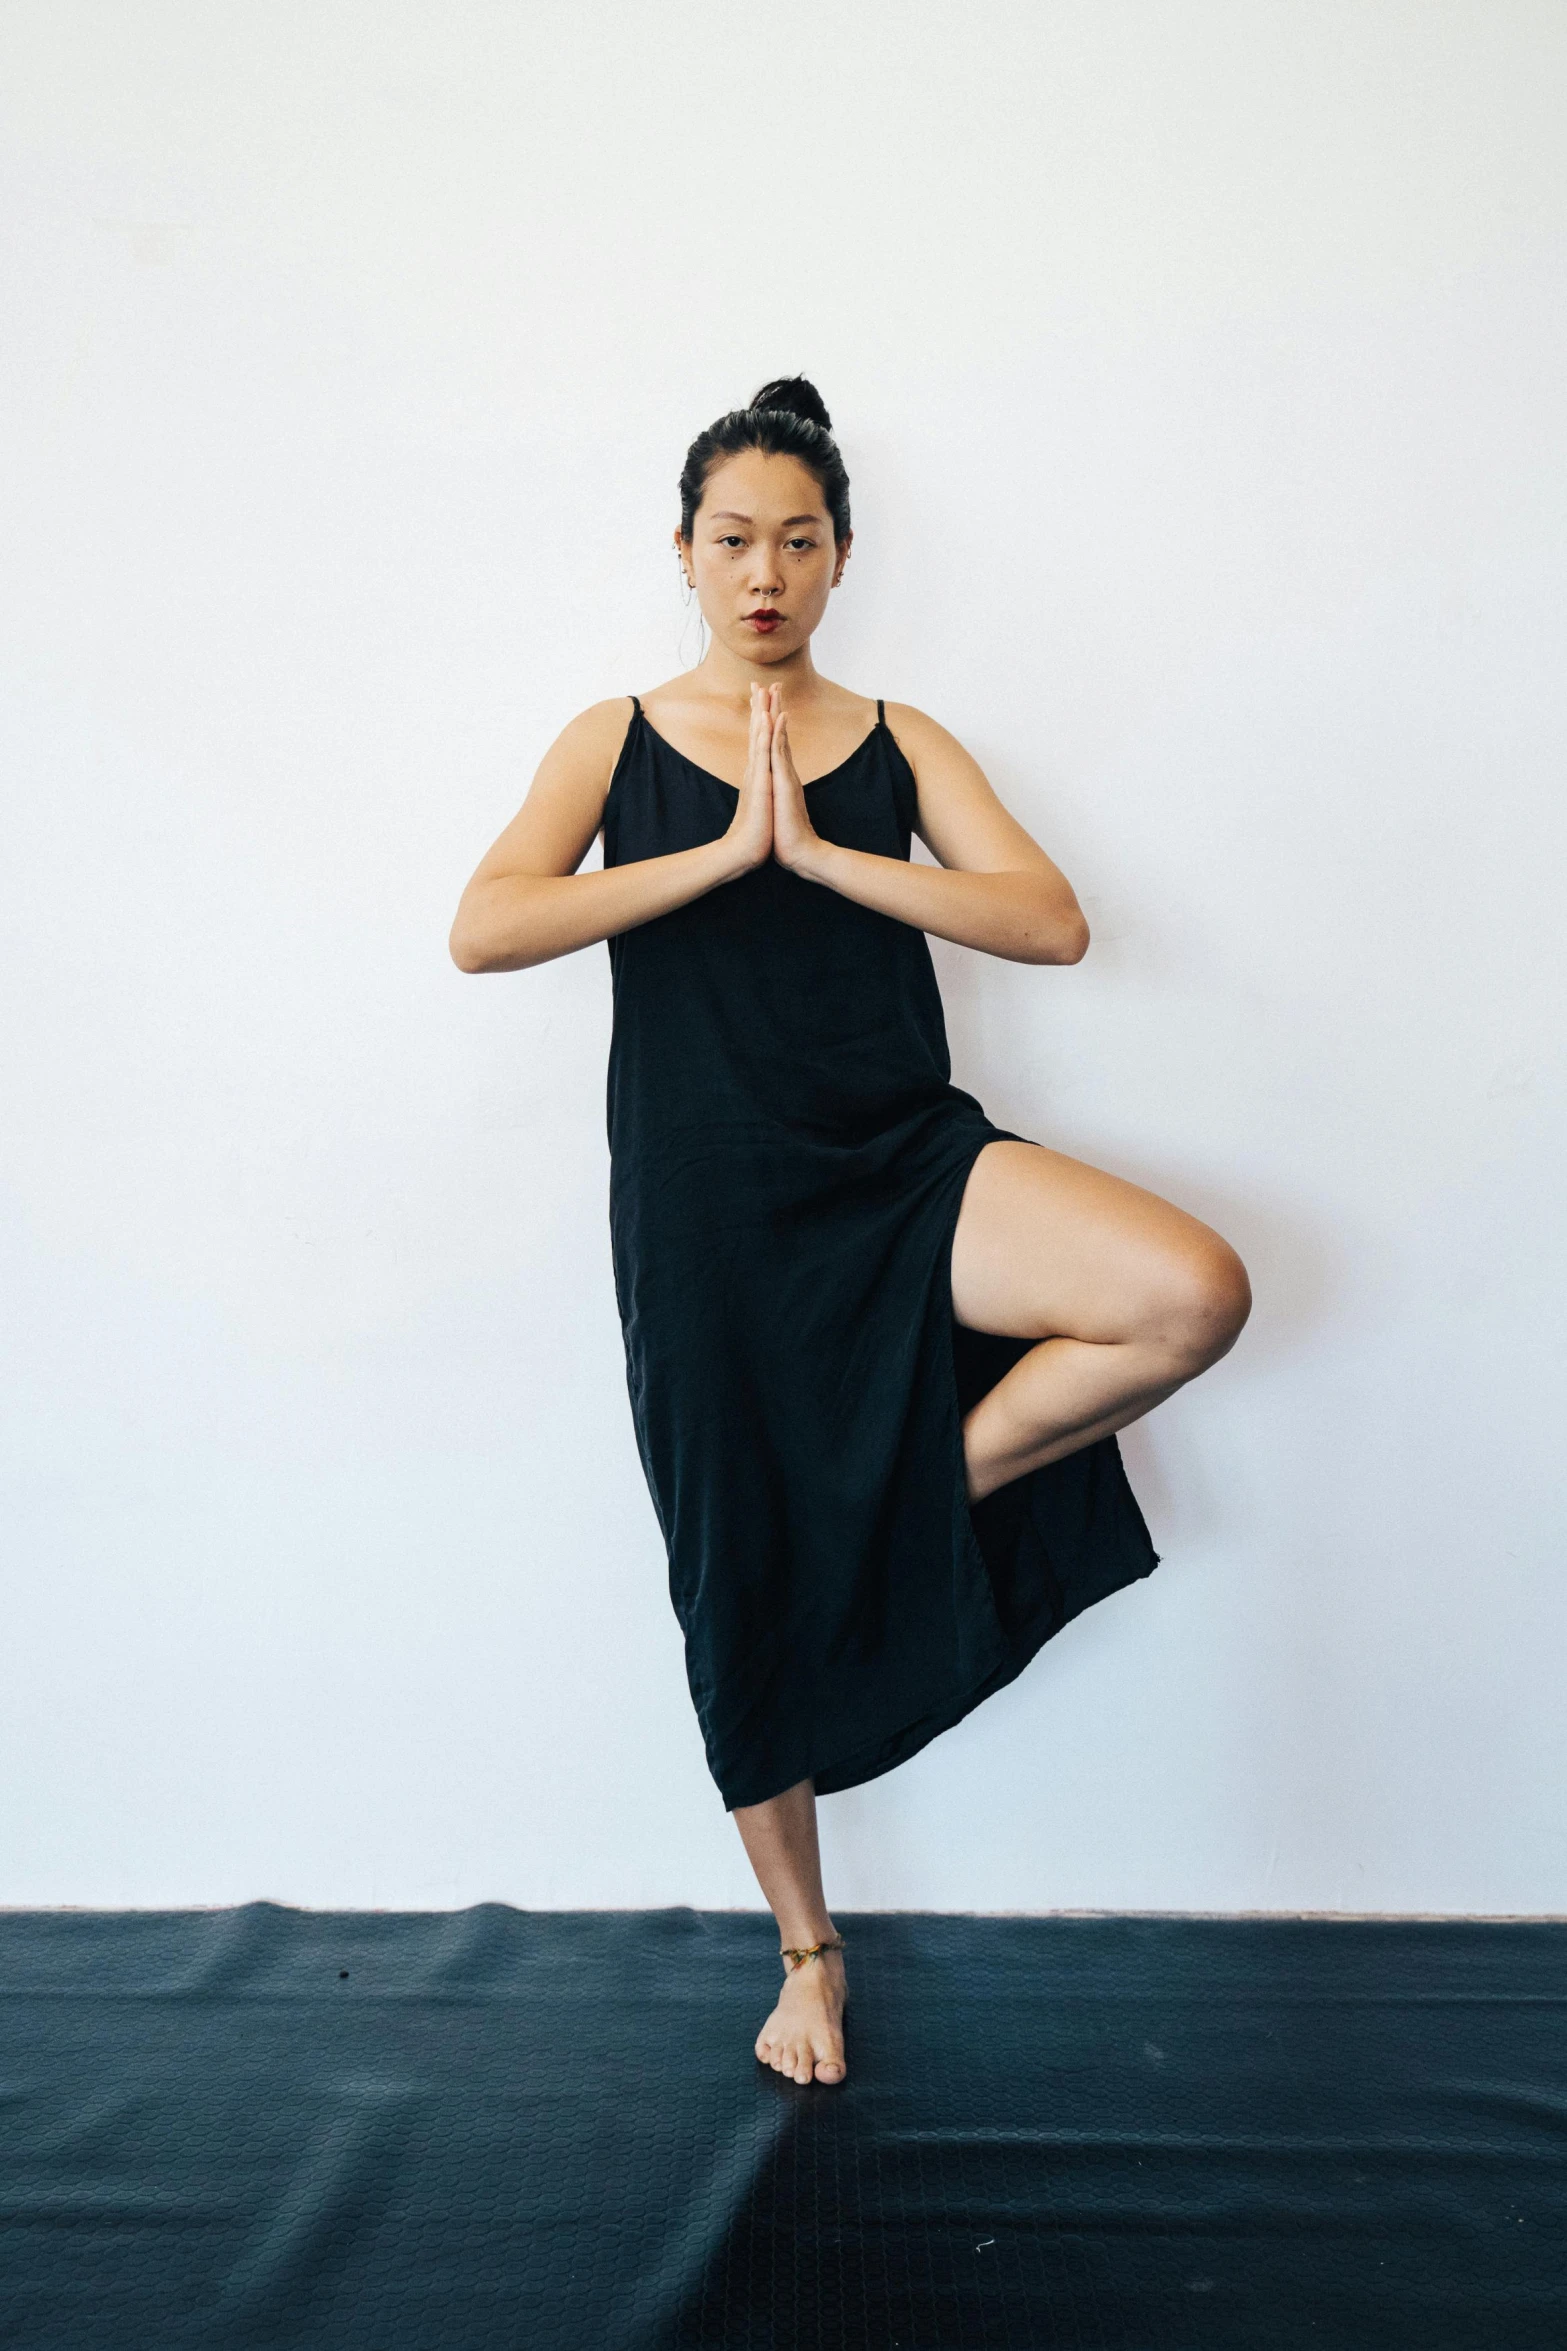 a woman in a black dress doing a yoga pose, inspired by Li Di, happening, curated collections, south east asian with long, shows a leg, organic dress